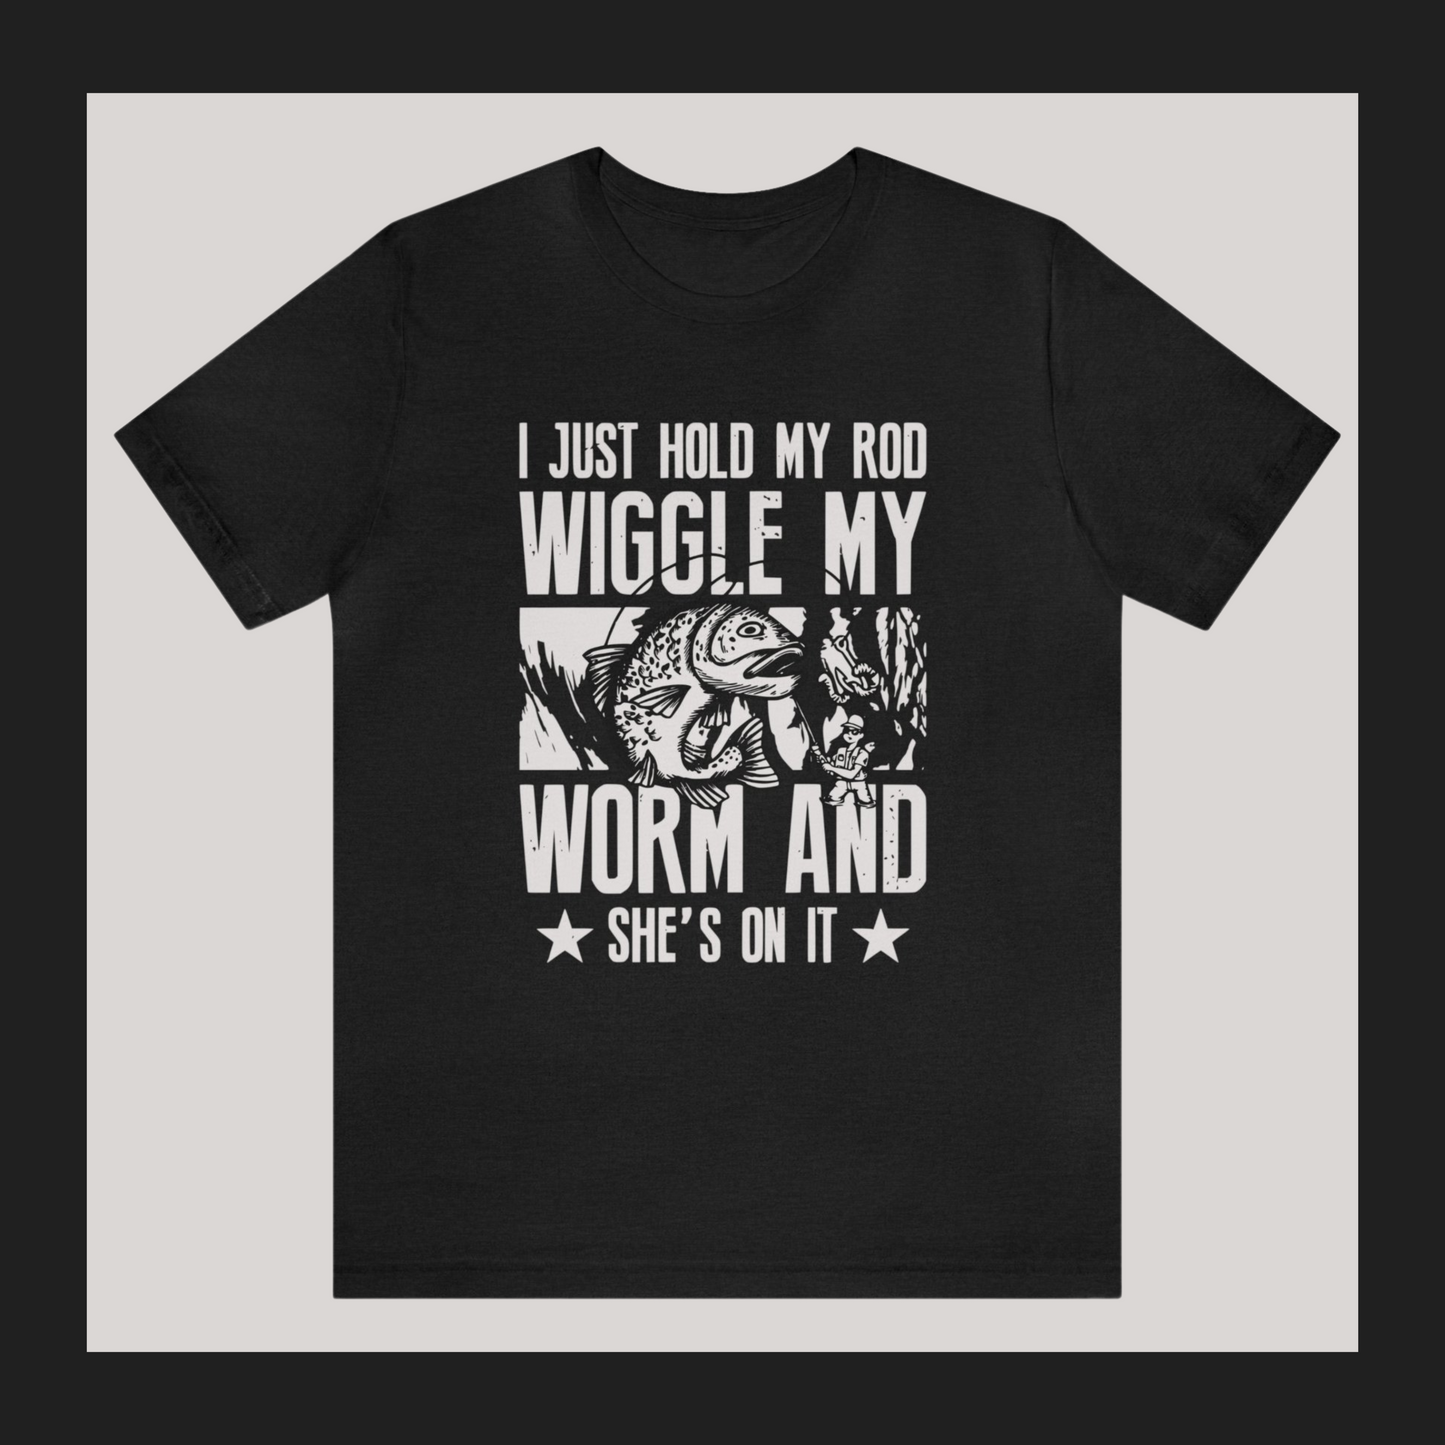 Funny Fishing Shirts, I just hold my rod and wiggle my worm and she's on it